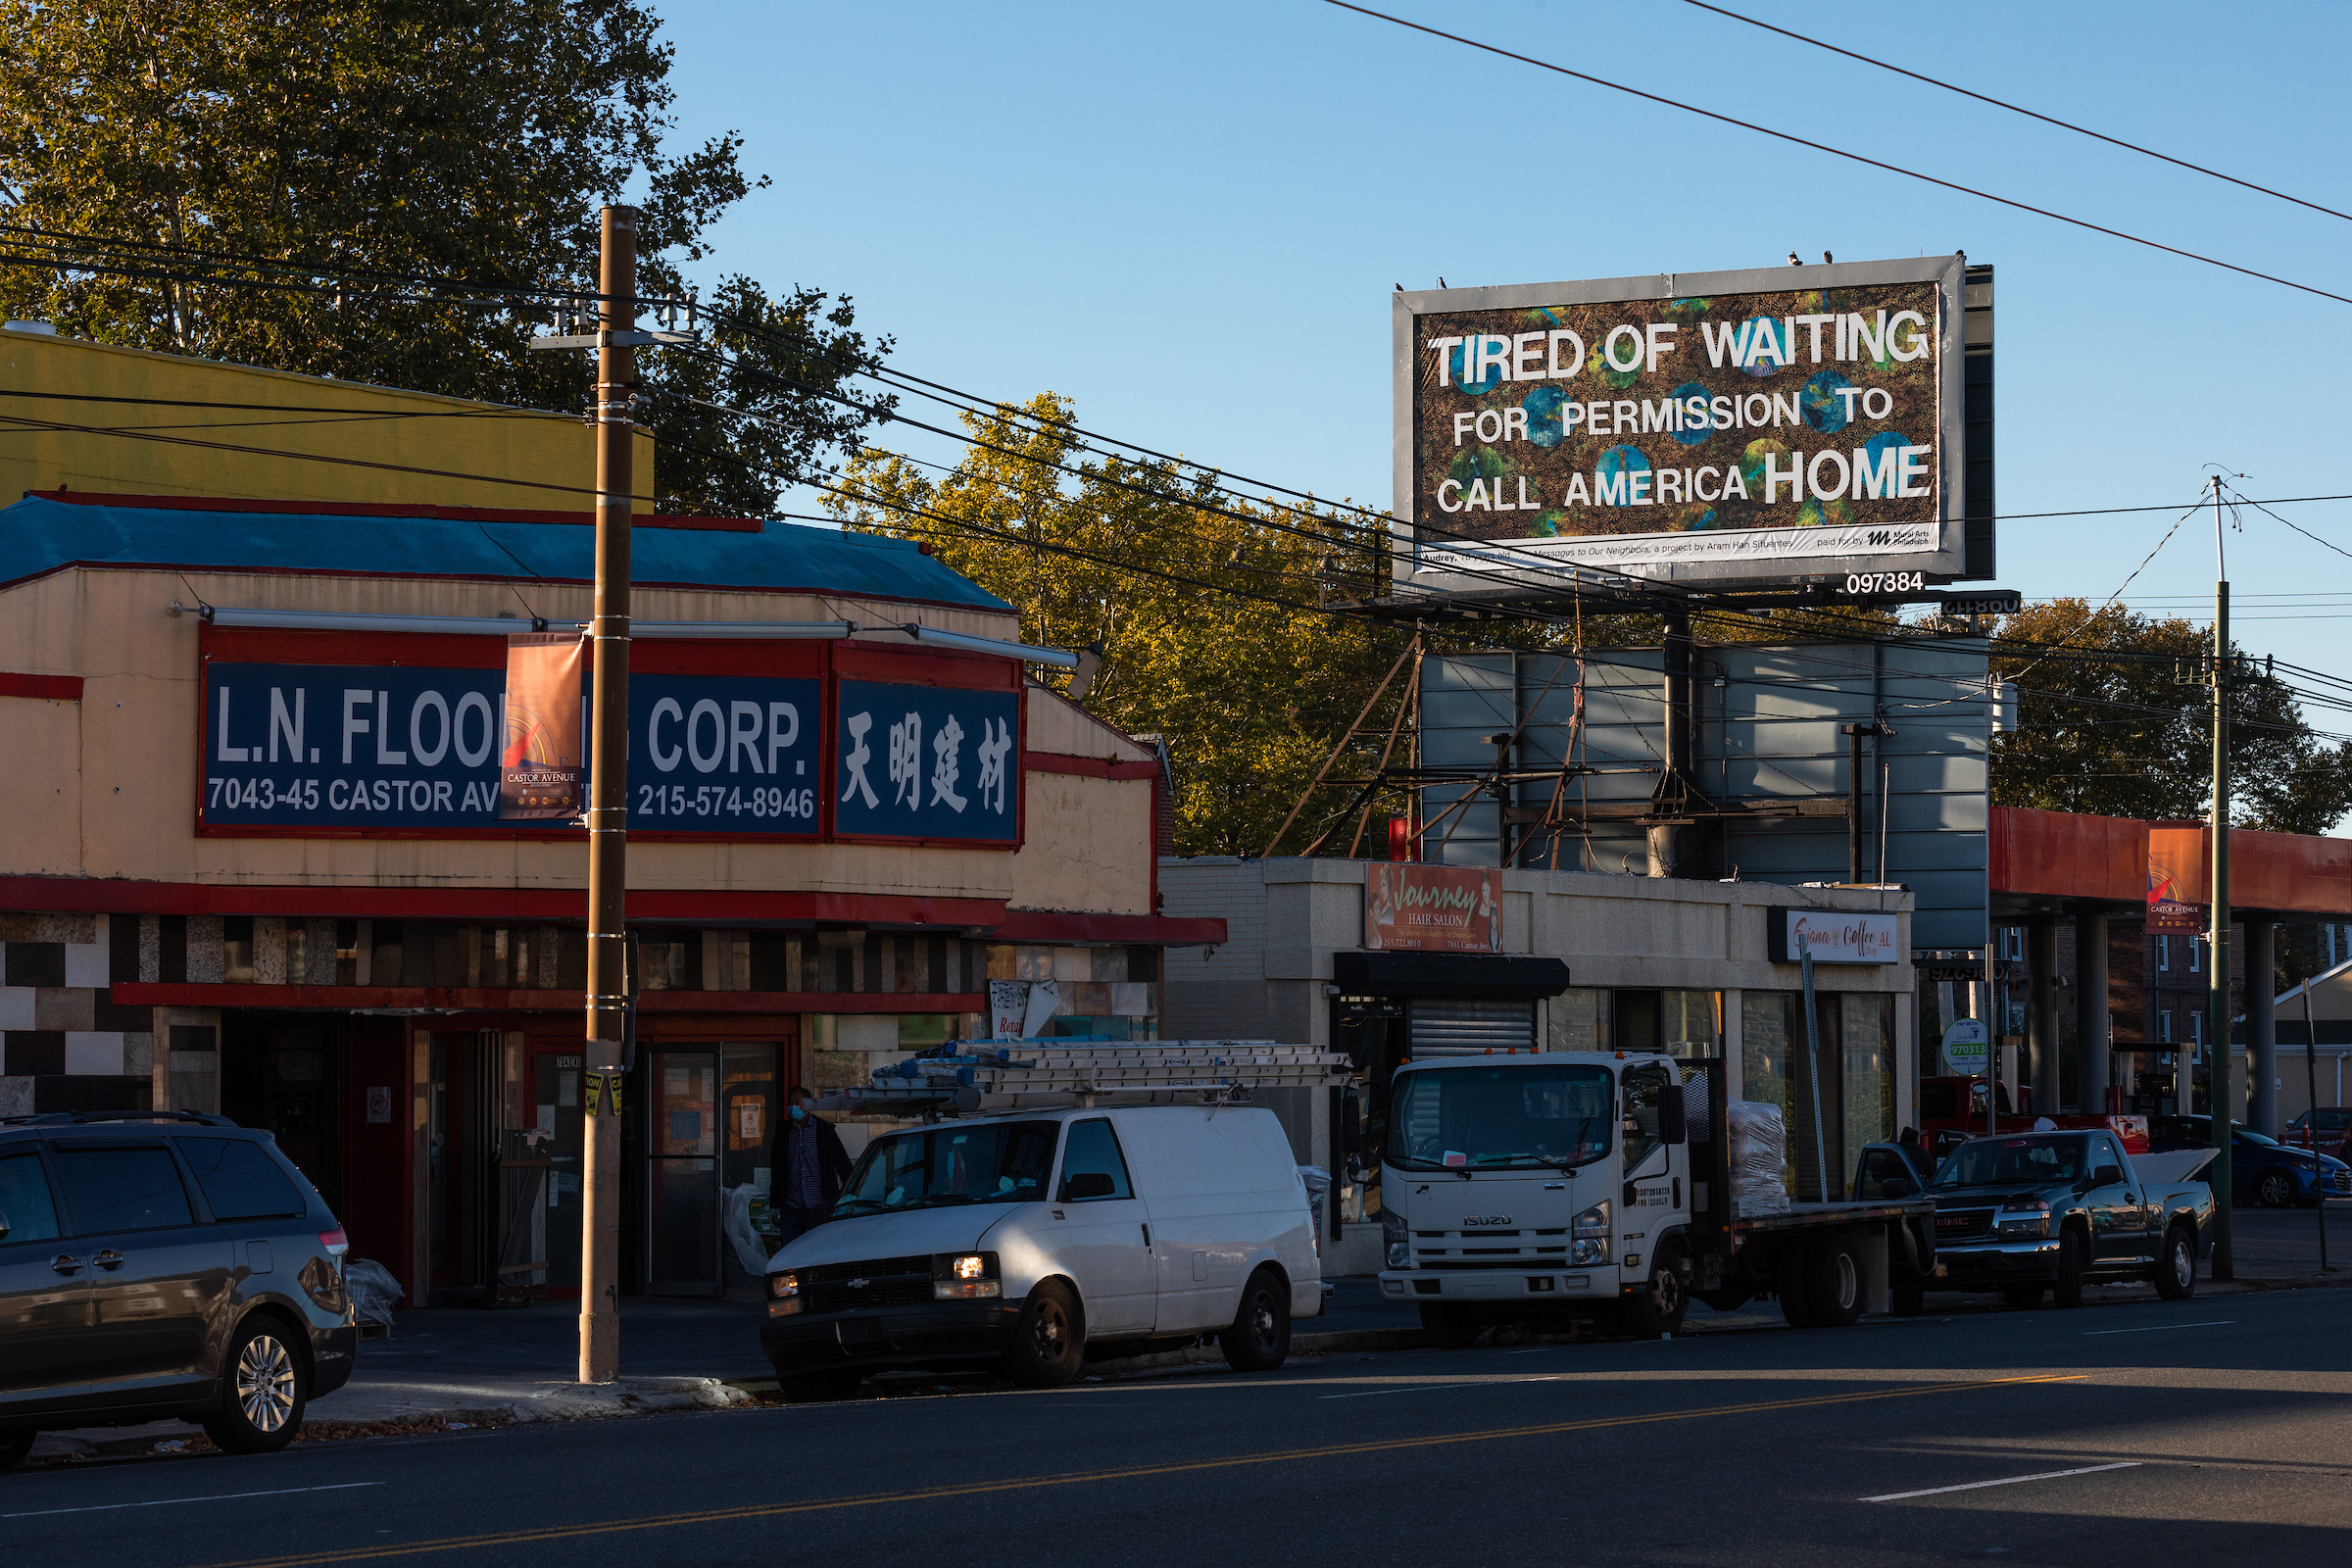 A sunlit billboard in Philadelphia is the main focus of this horizontally oriented photograph. Written in large white block letters against a busy abstract patterned background, the sign reads “Tired of Waiting for Permission to Call America Home.” According to Mural Arts Philidelphia’s Instagram, this was billboard is part of their “Messages to Our Neighbors” project in which artist Aram Han Sifuentes “worked with high school students to explore the intersection of citizenship, immigration, and belonging.” The billboard hangs between powerlines and there are trees in the background of this Northeast Philadelphia street scene. The Castor Avenue street below is a quiet multicultural urban street with a flooring business with Chinese lettering, a hair salon, and a coffee shop. Work trucks and vans are parked in front.